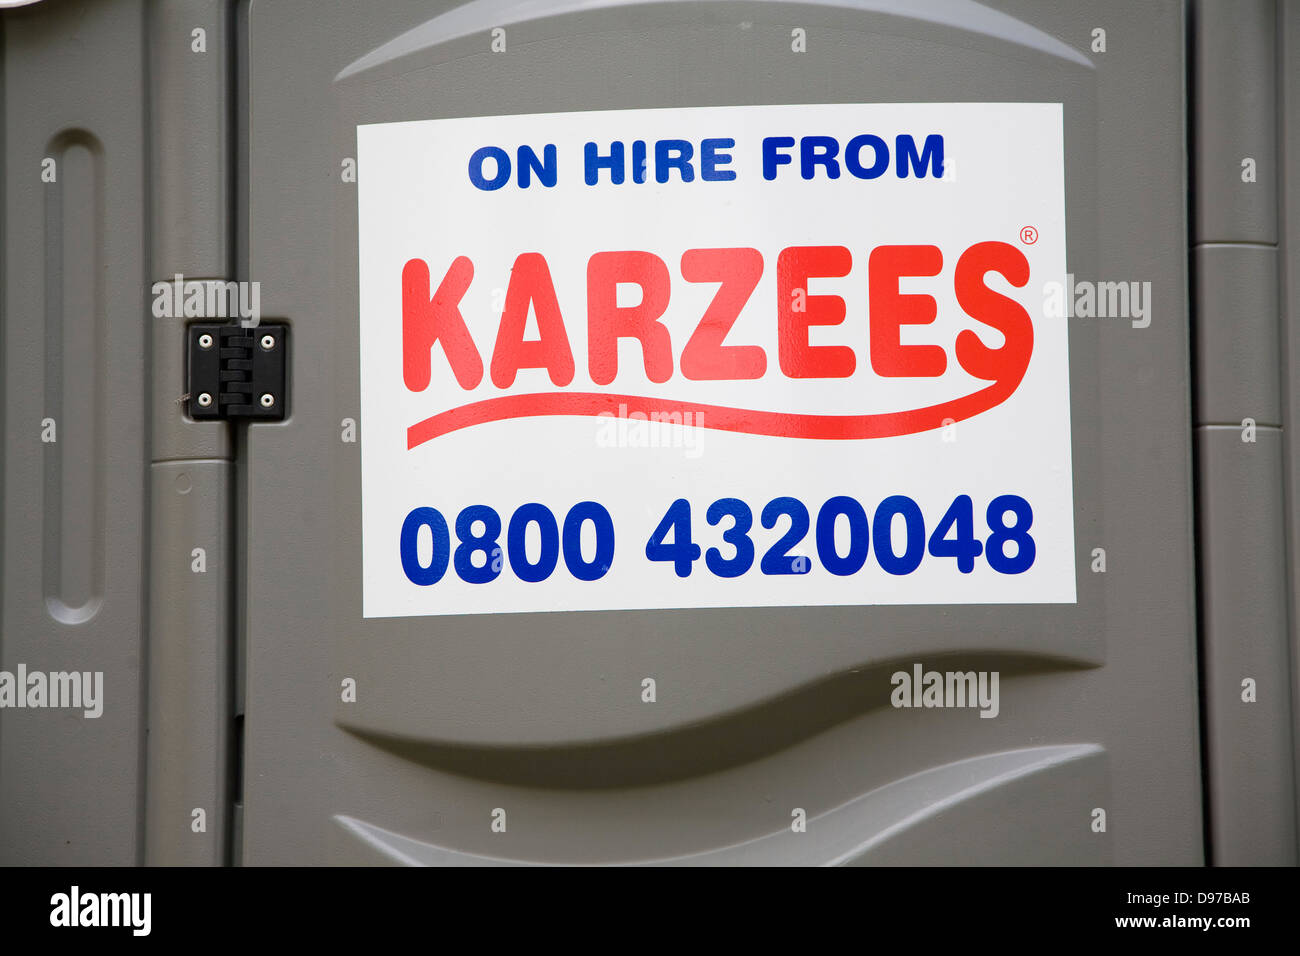 Karzees mobile toilet on hire sign UK Stock Photo